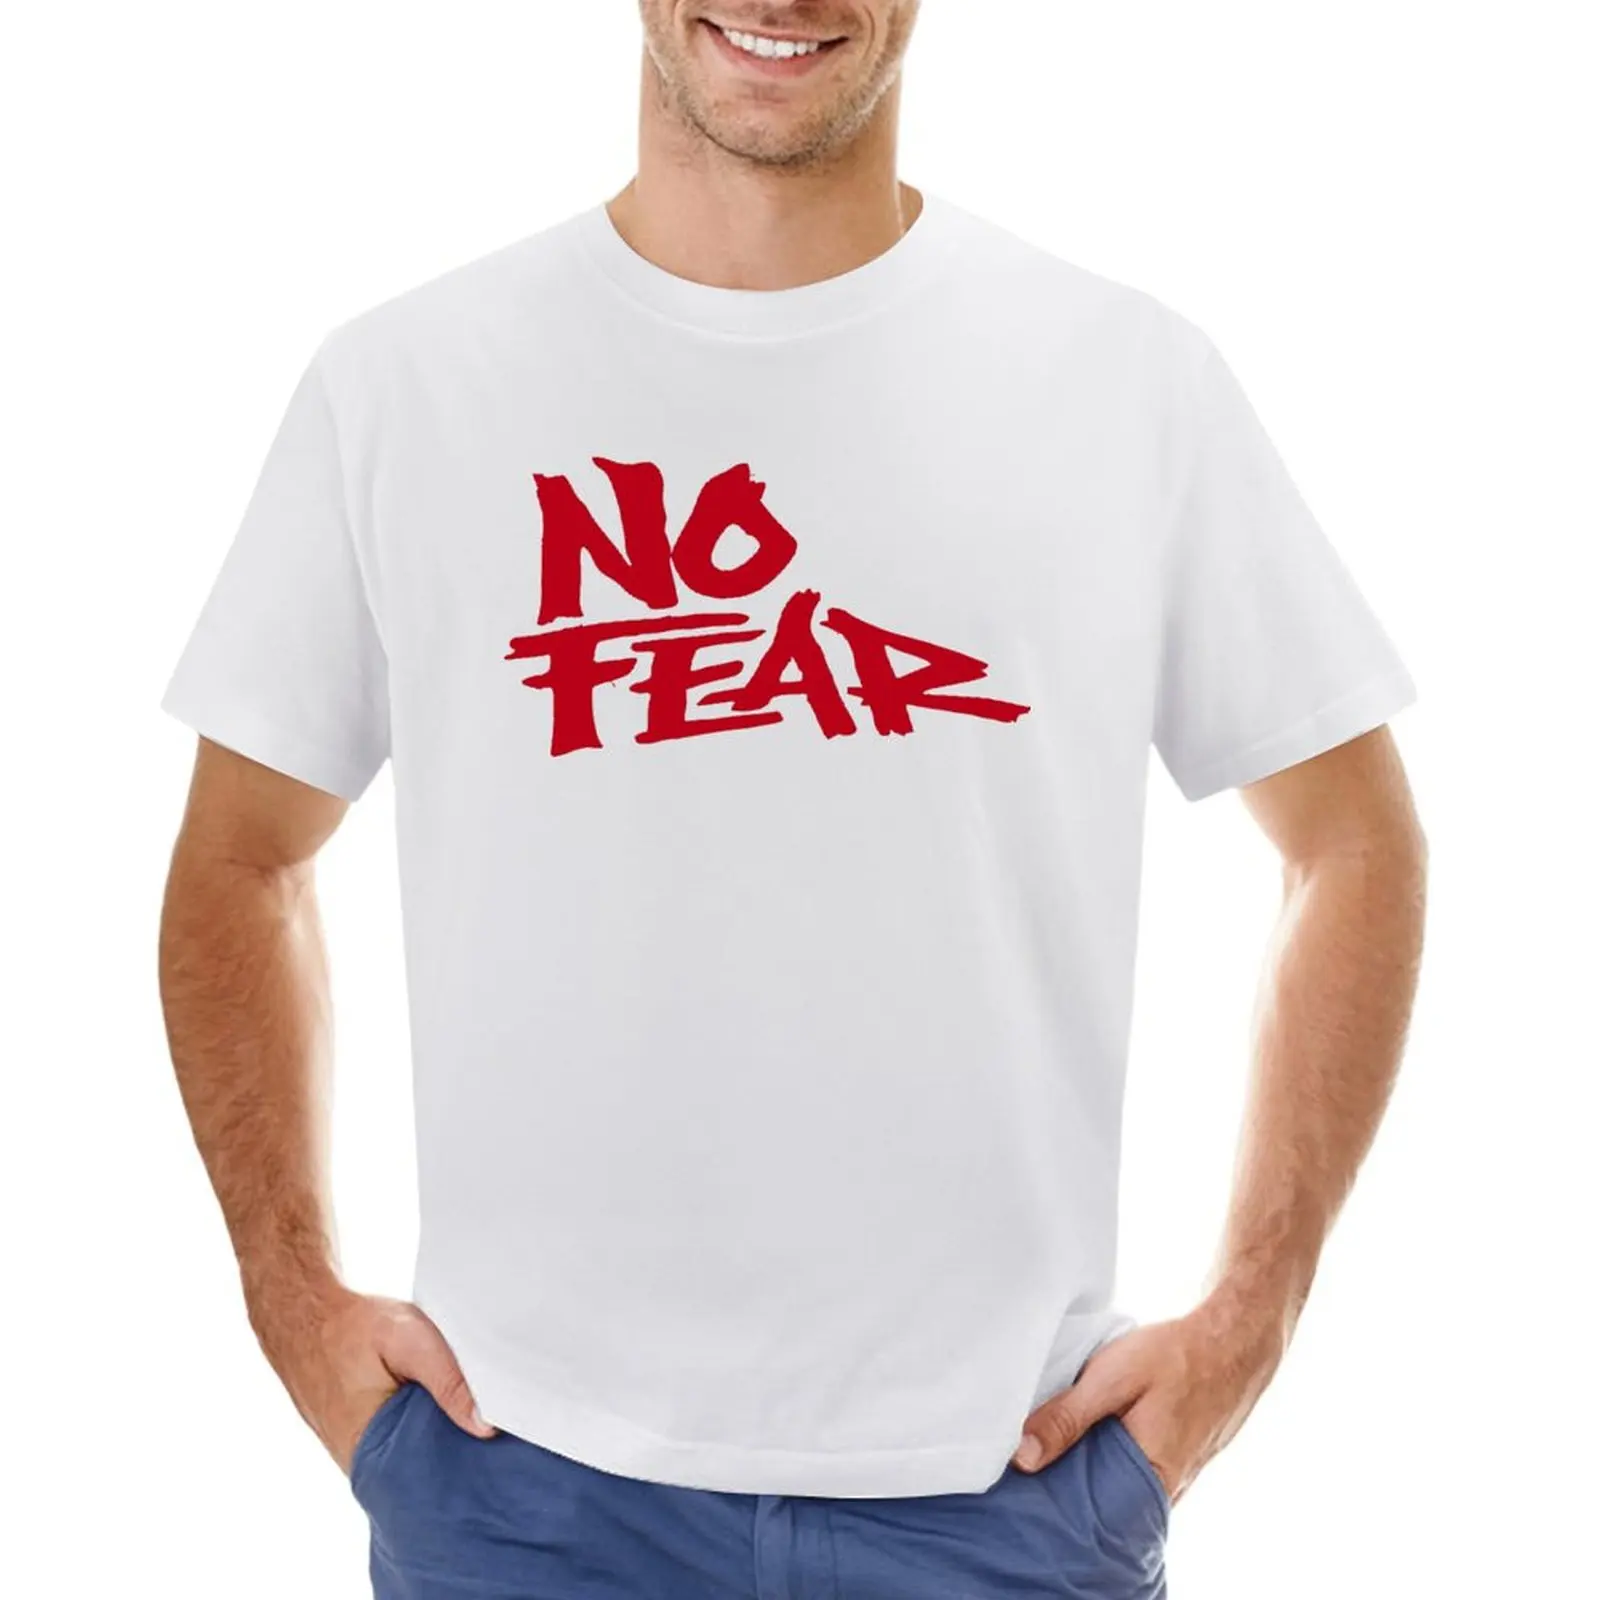 

NO FEAR TAG T-shirt oversized shirts graphic tees anime Short sleeve tee men clothings